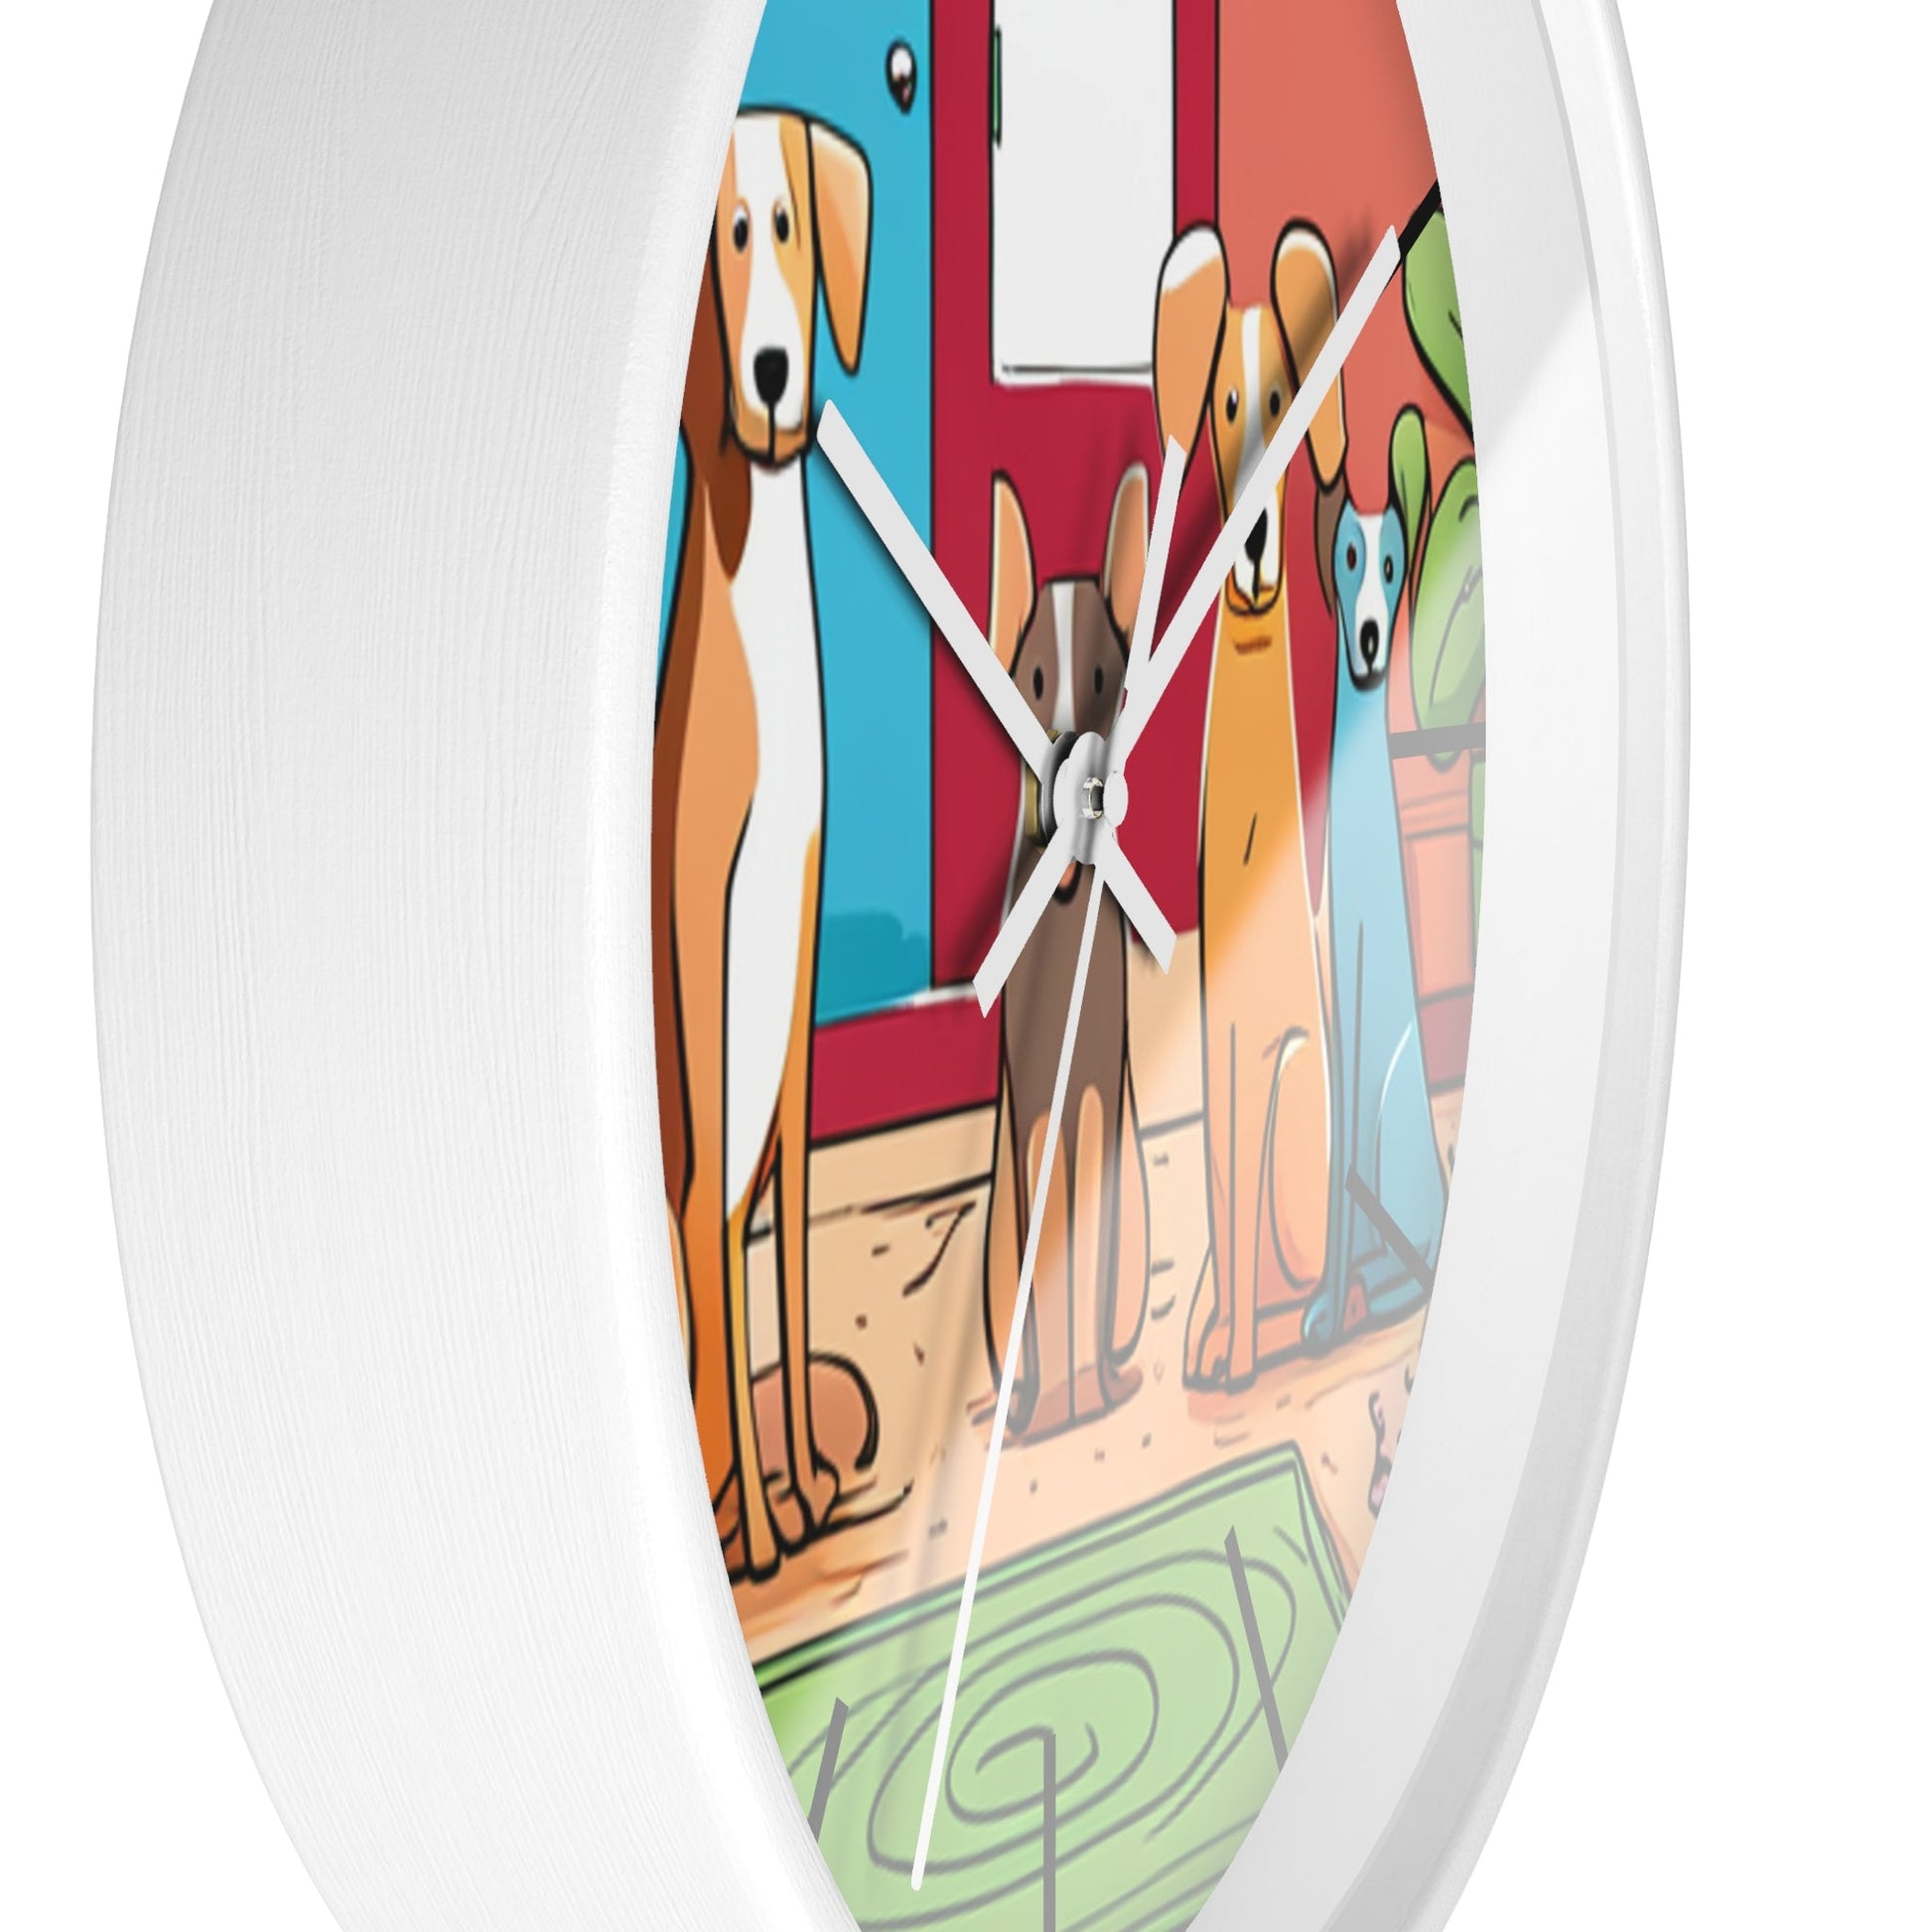 Wall Clock Featuring A Family of Illustrated Dogs - Lizard Vigilante